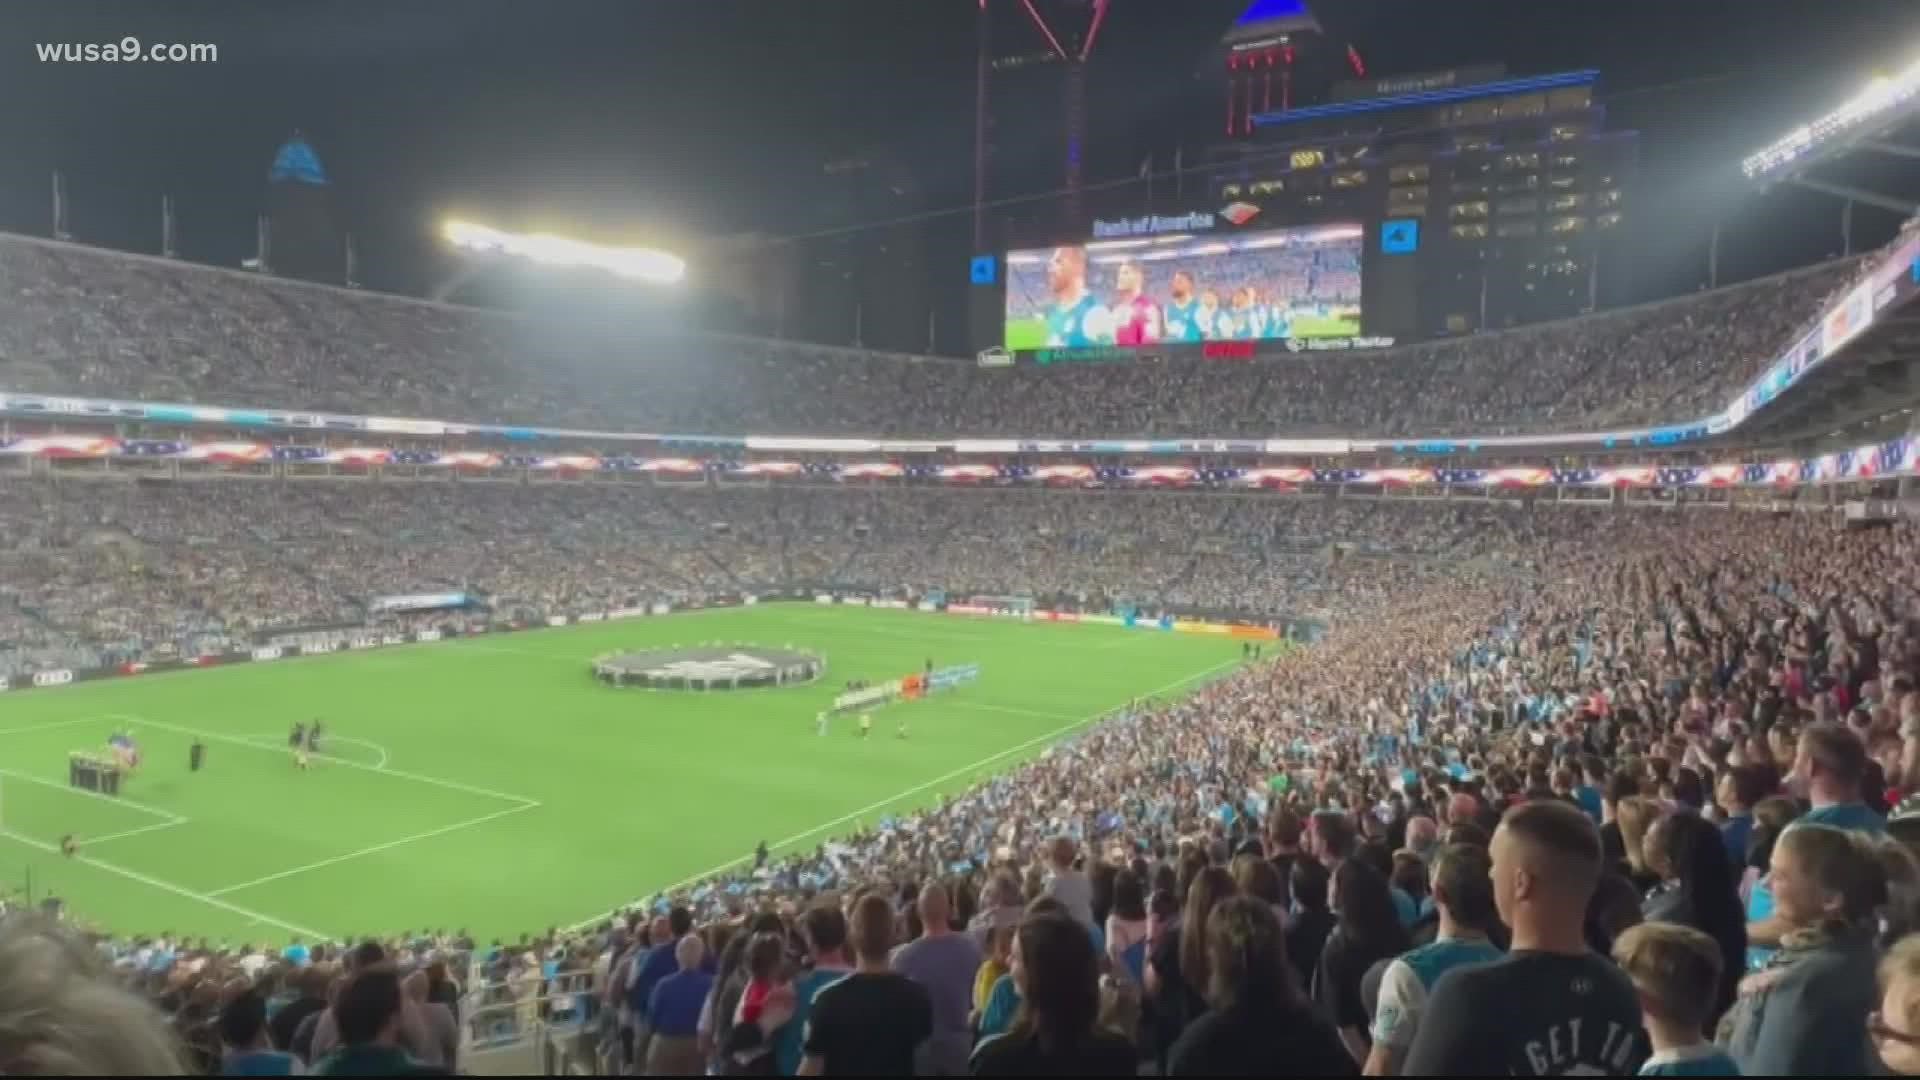 The crowd of 74,000 people at an MLS game in Charlotte went full acapella while singing the national anthem.